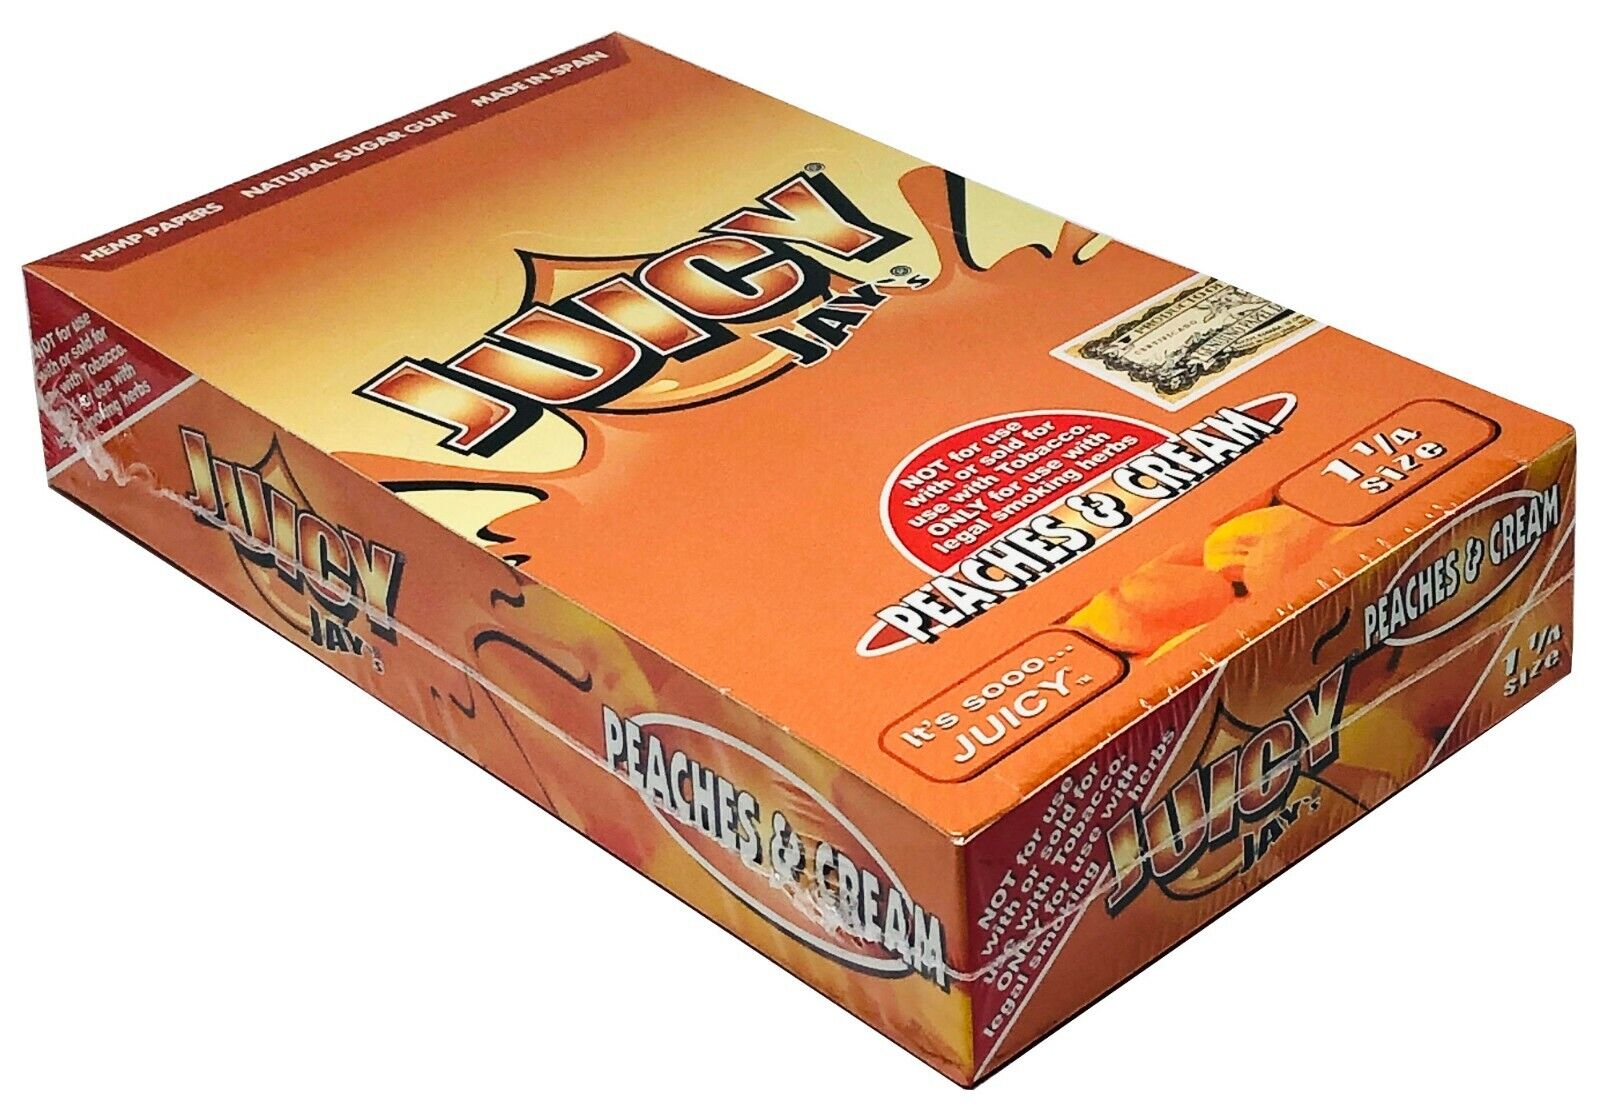 Juicy Jay's Peaches & Cream Flavored Rolling Papers 1.25 Box of 24